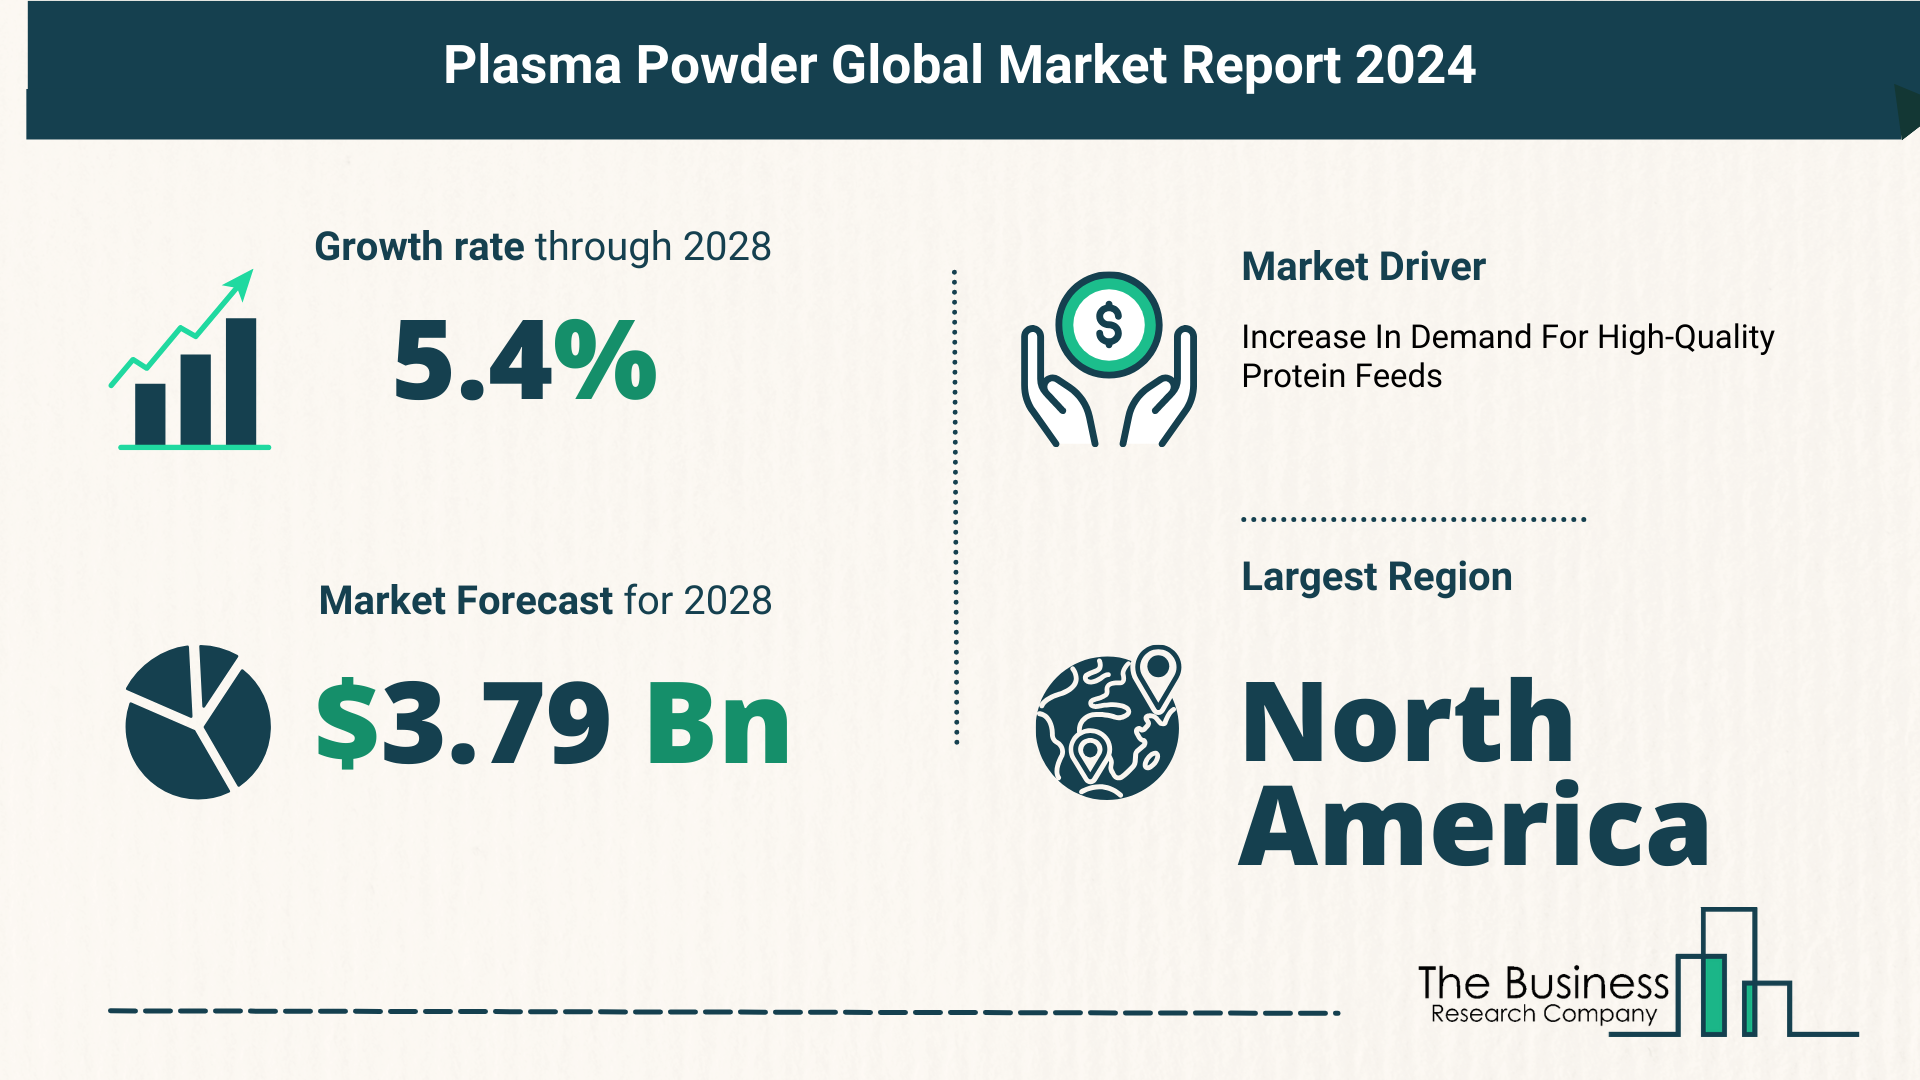 How Is The Plasma Powder Market Expected To Grow Through 2024-2033